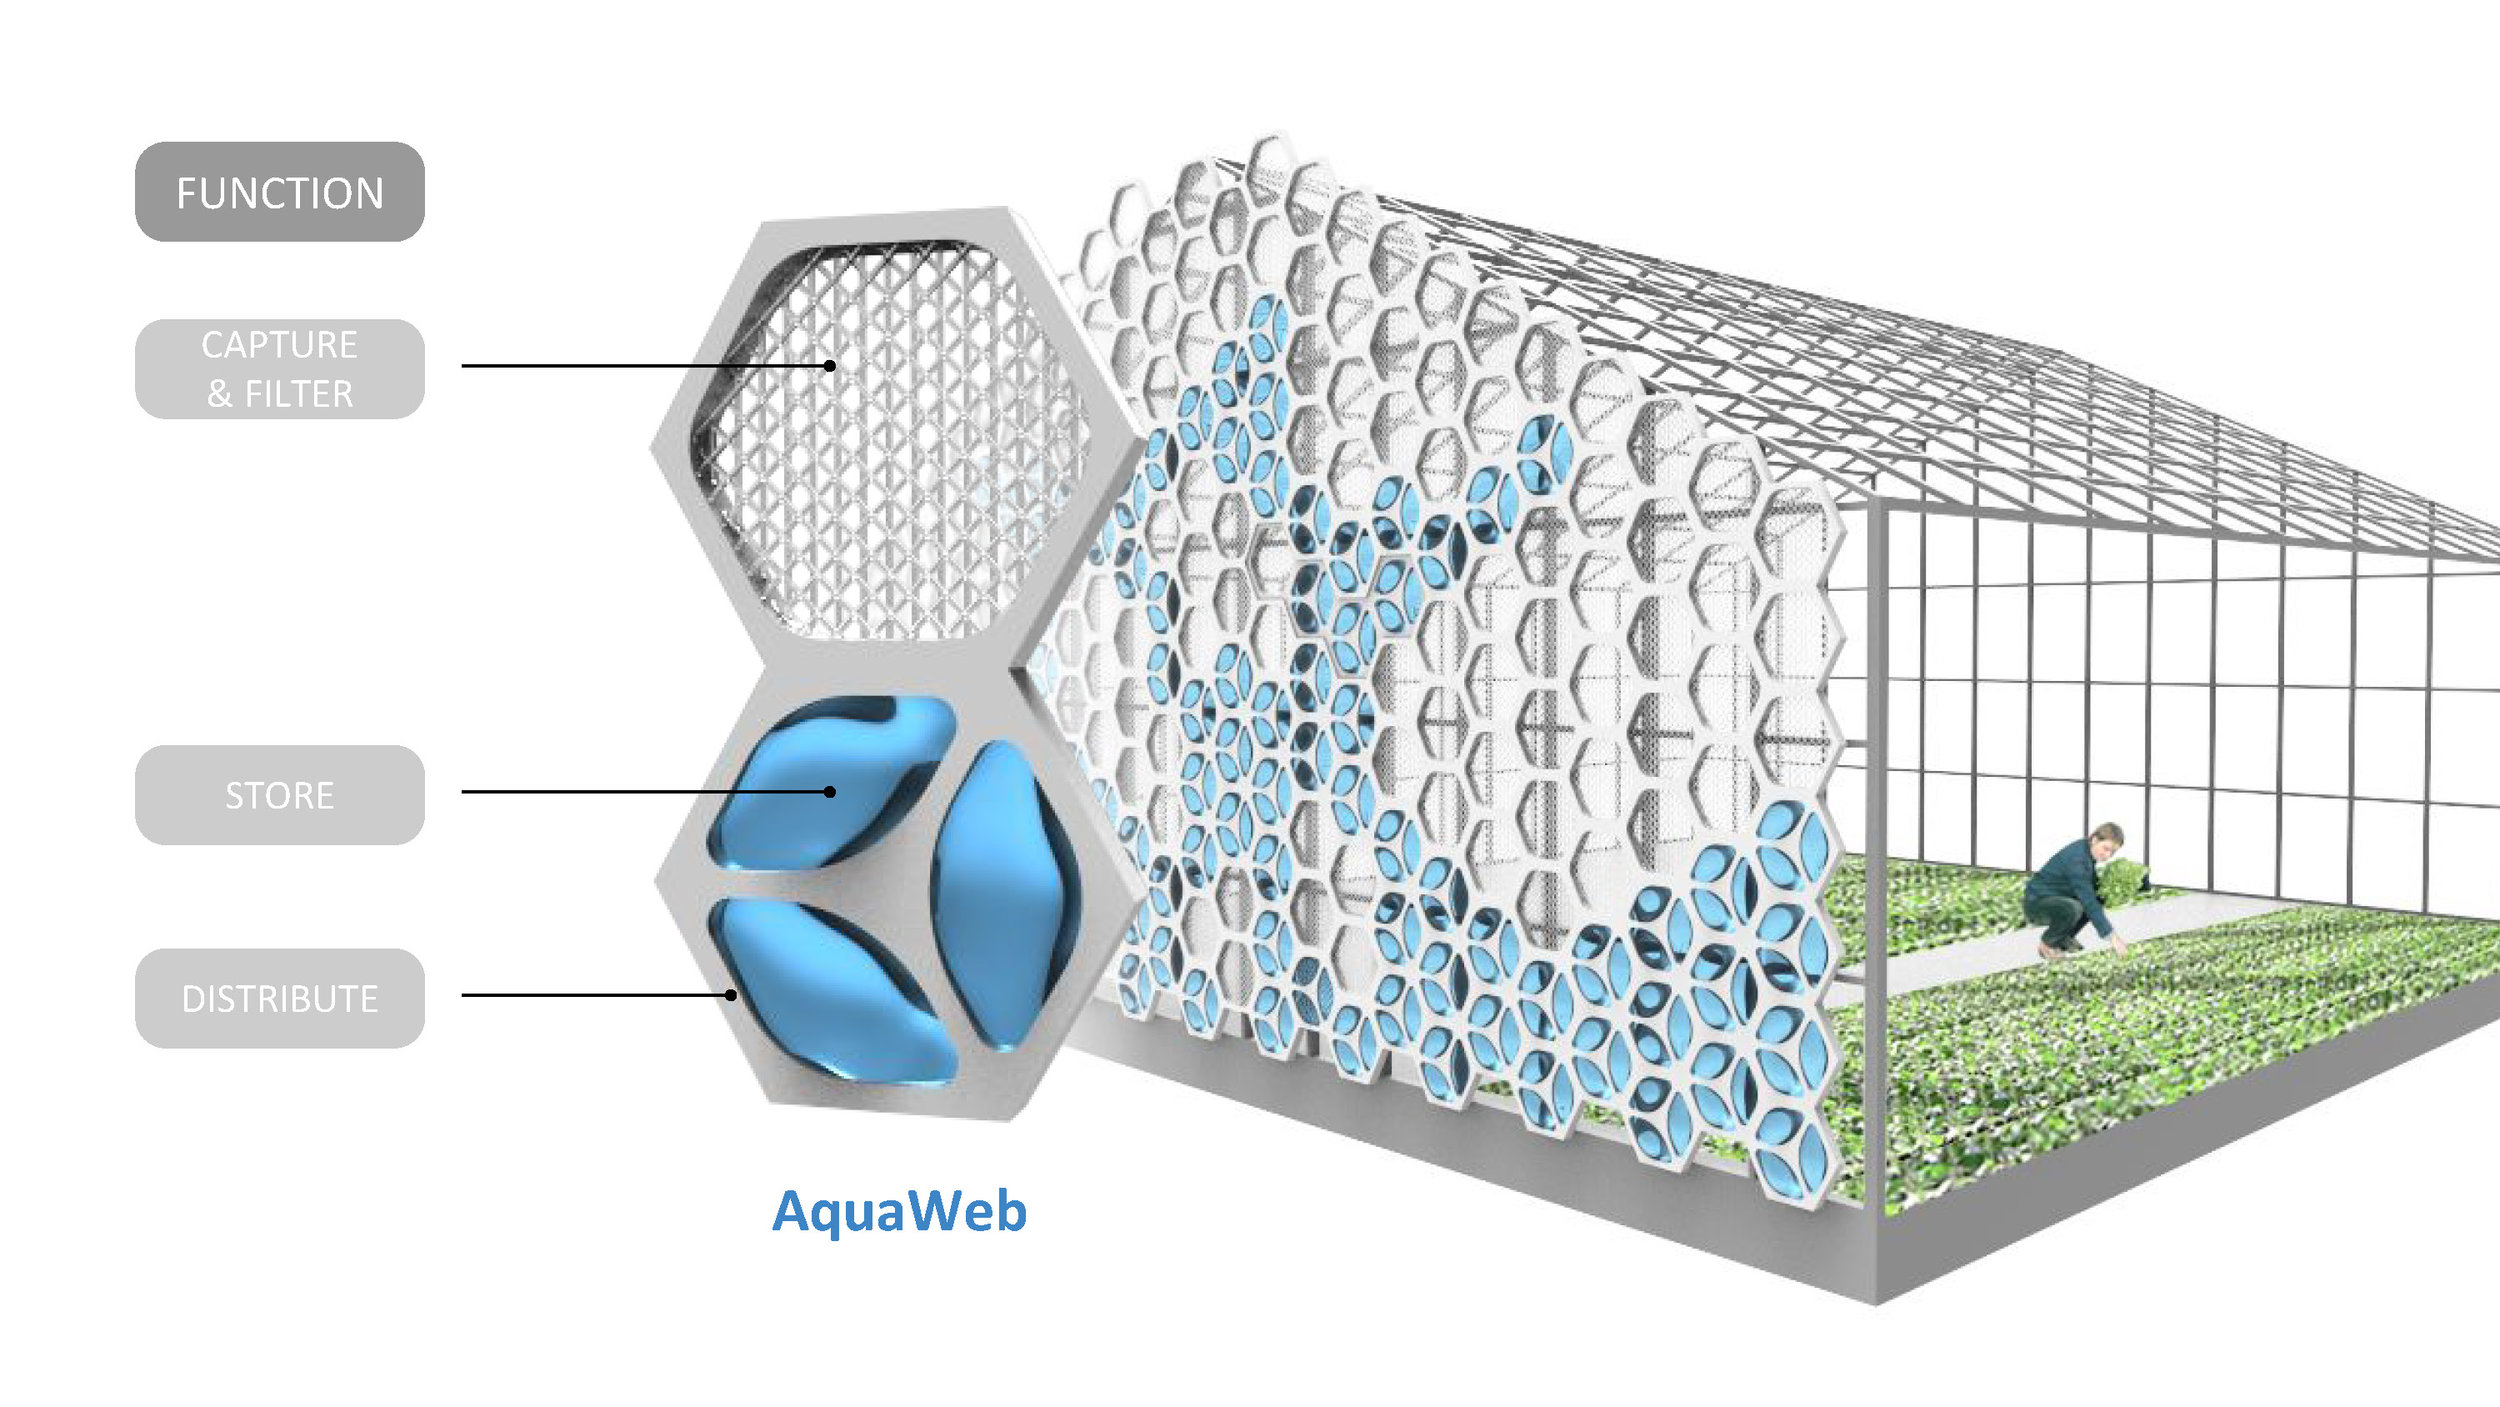  NexLoop is developing the AquaWeb, a modular, biomimetic, all-in-one water sourcing and management system to help urban food producers collect, filter, store, and distribute atmospheric water. 